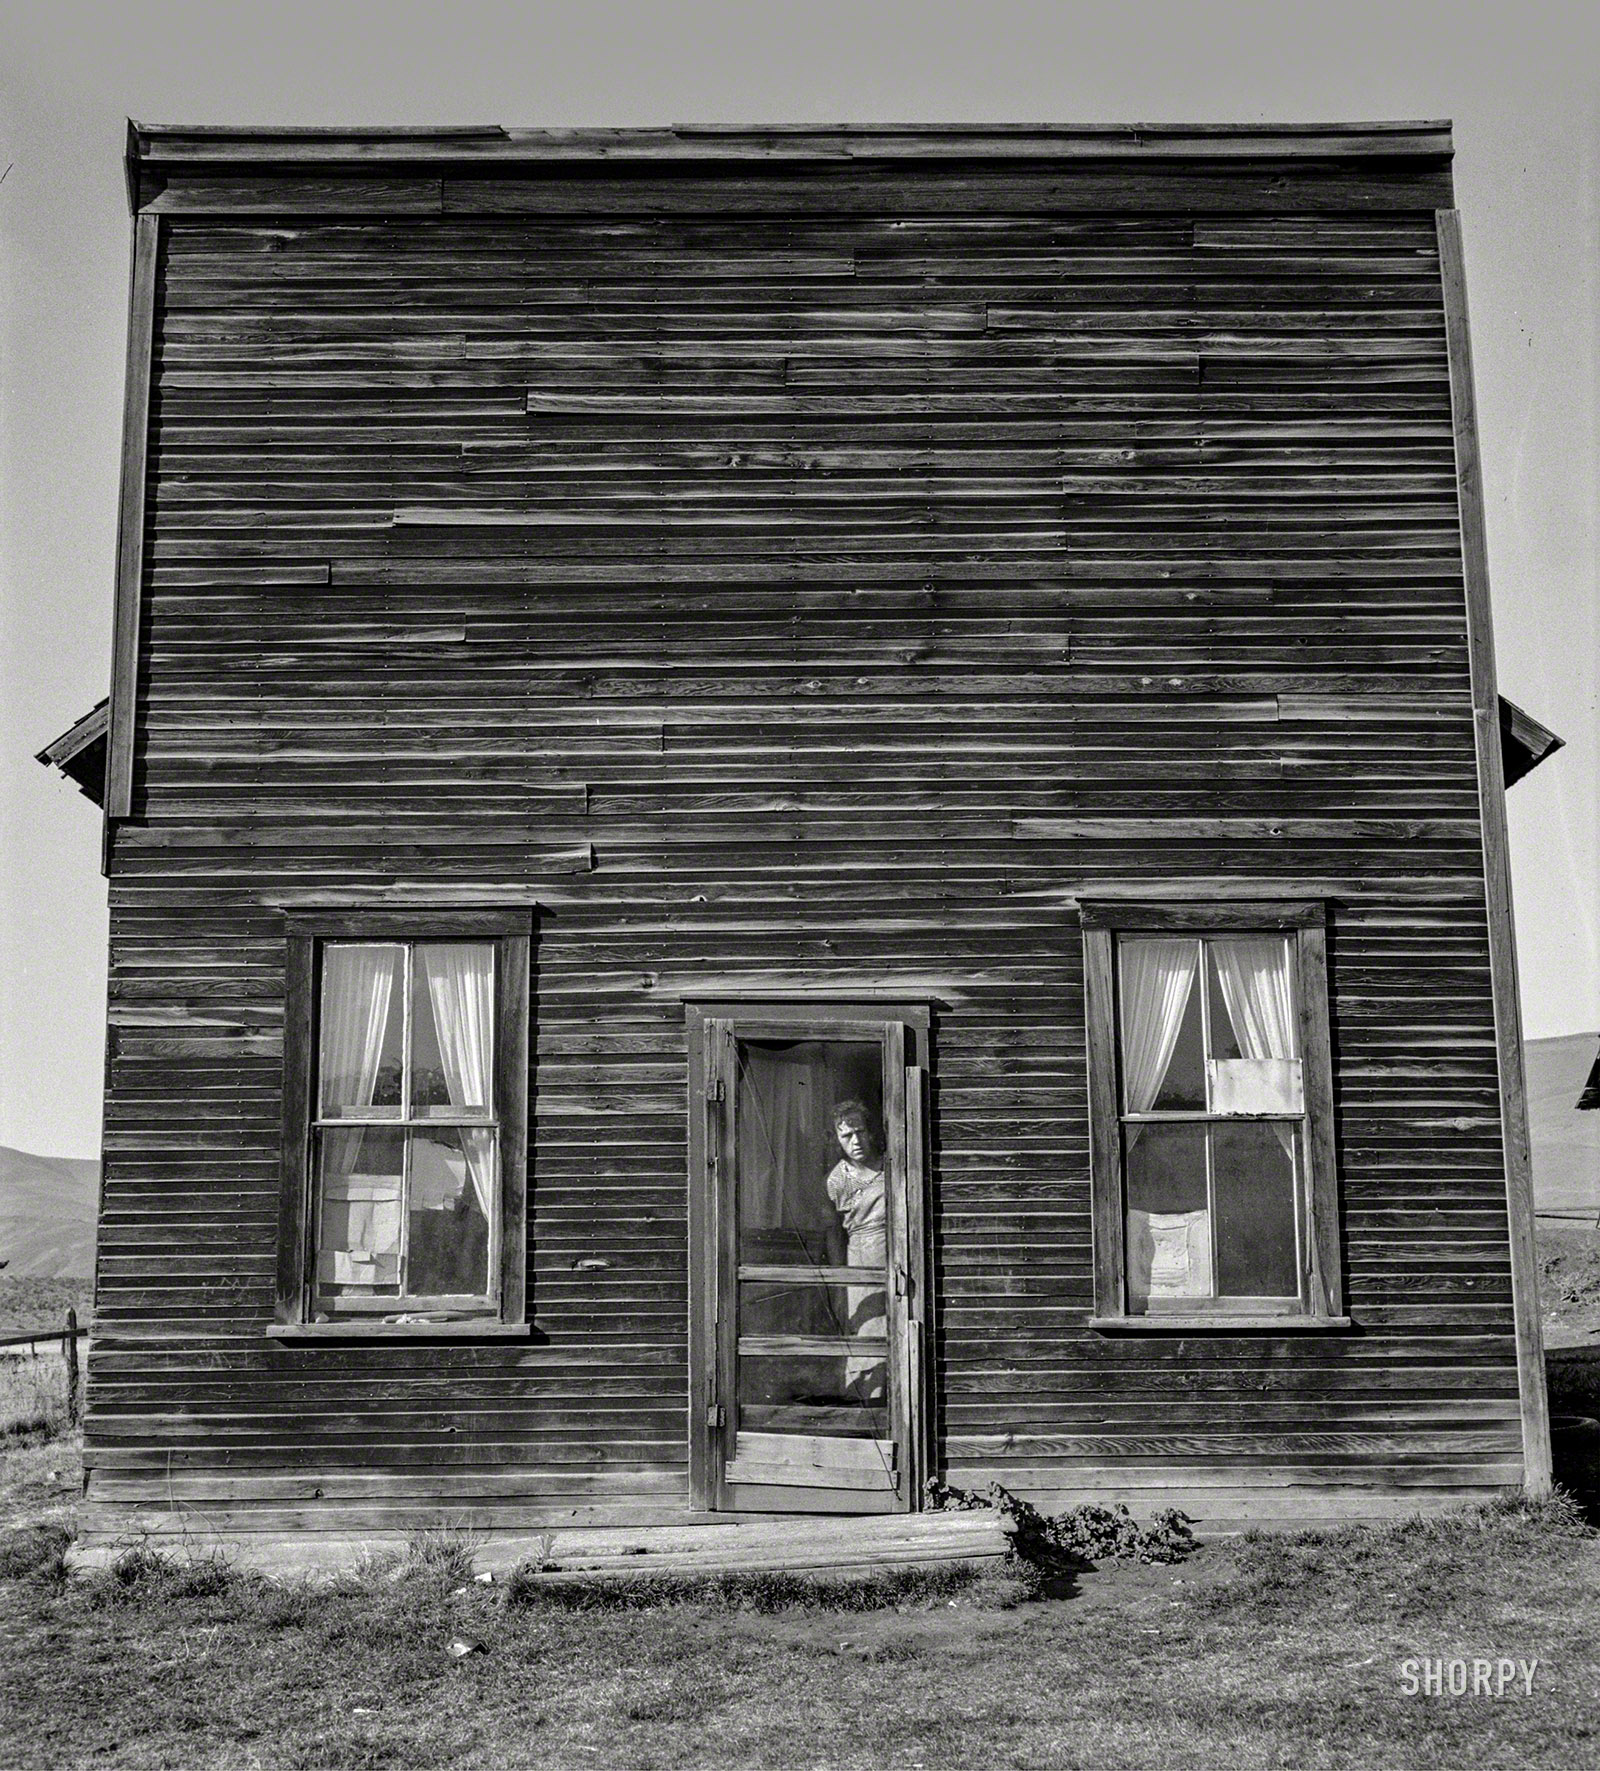 October 1939. Gem County, Idaho. "Member of Ola self help sawmill co-op lives in what was once the 'Jackknife Saloon.' This type building is characteristic of early Idaho. The stagecoach used to stop here to change horses and for the refreshment of travelers. This was discontinued in 1914." Medium format nitrate negative by Dorothea Lange for the Farm Security Administration. View full size.